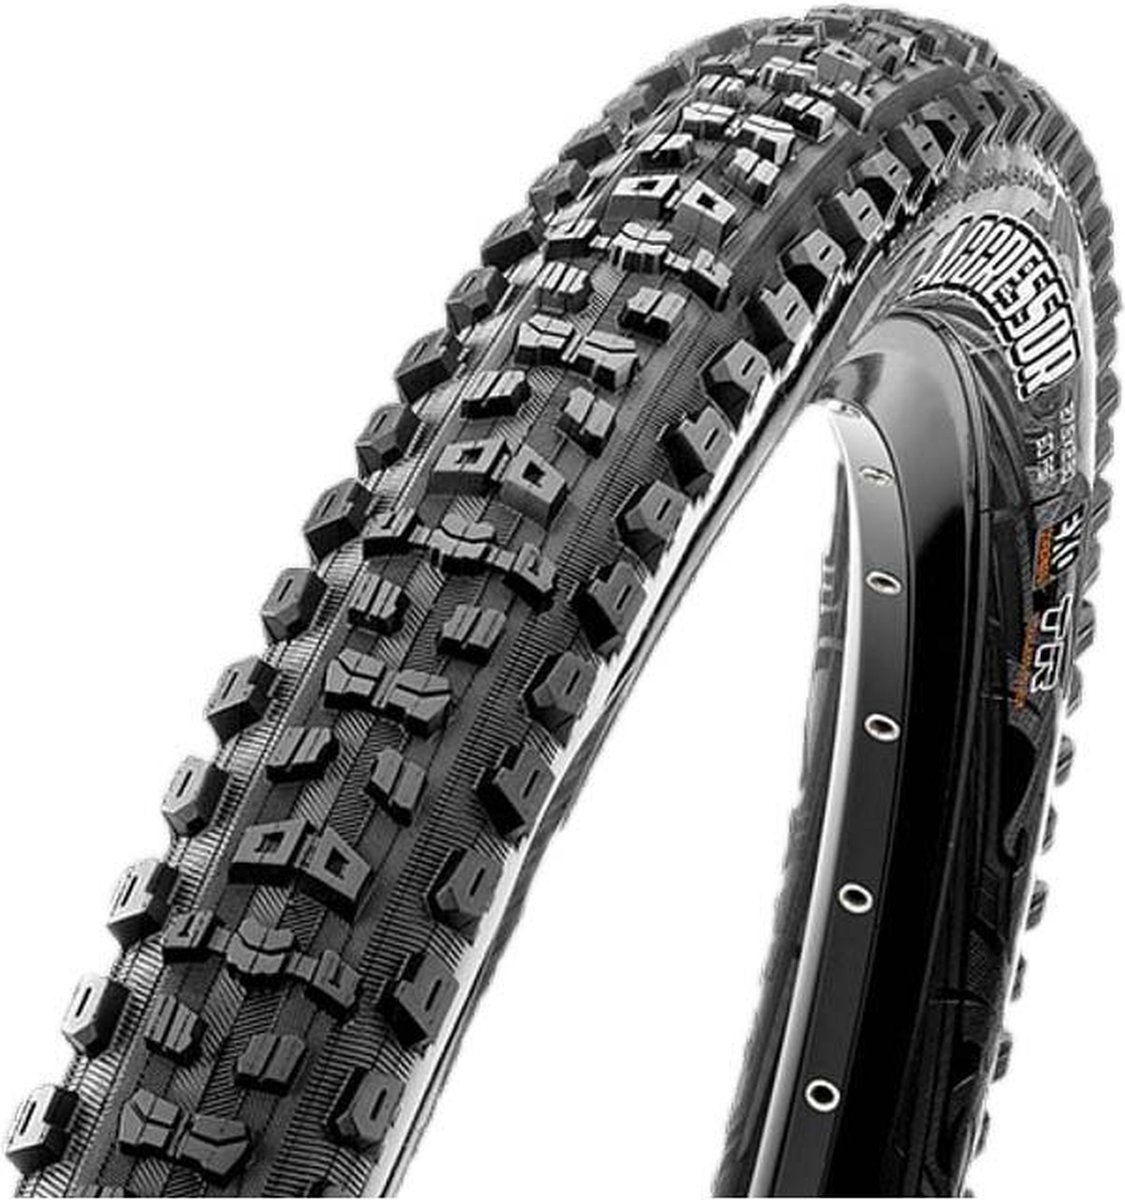 Maxxis Aggressor Vouwband 29x2.50